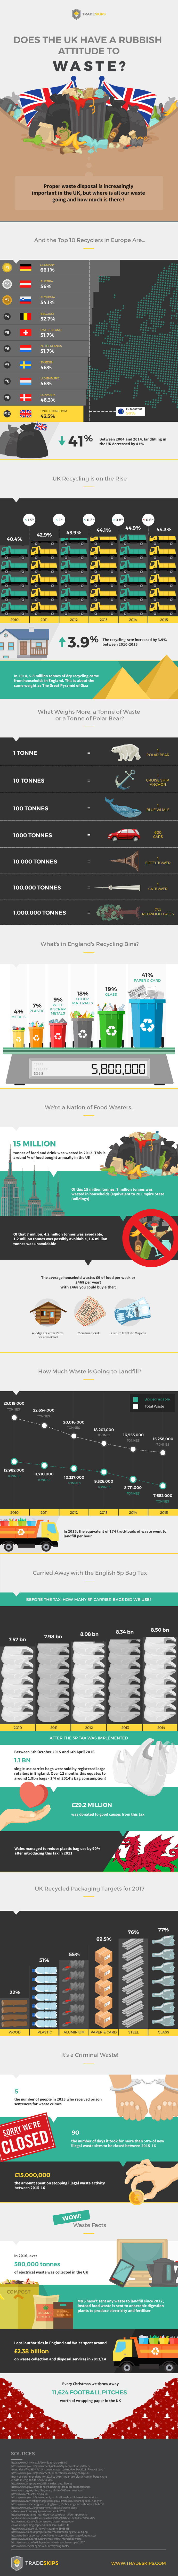 Does the UK have a Rubbish Attitude to Waste? Infographic